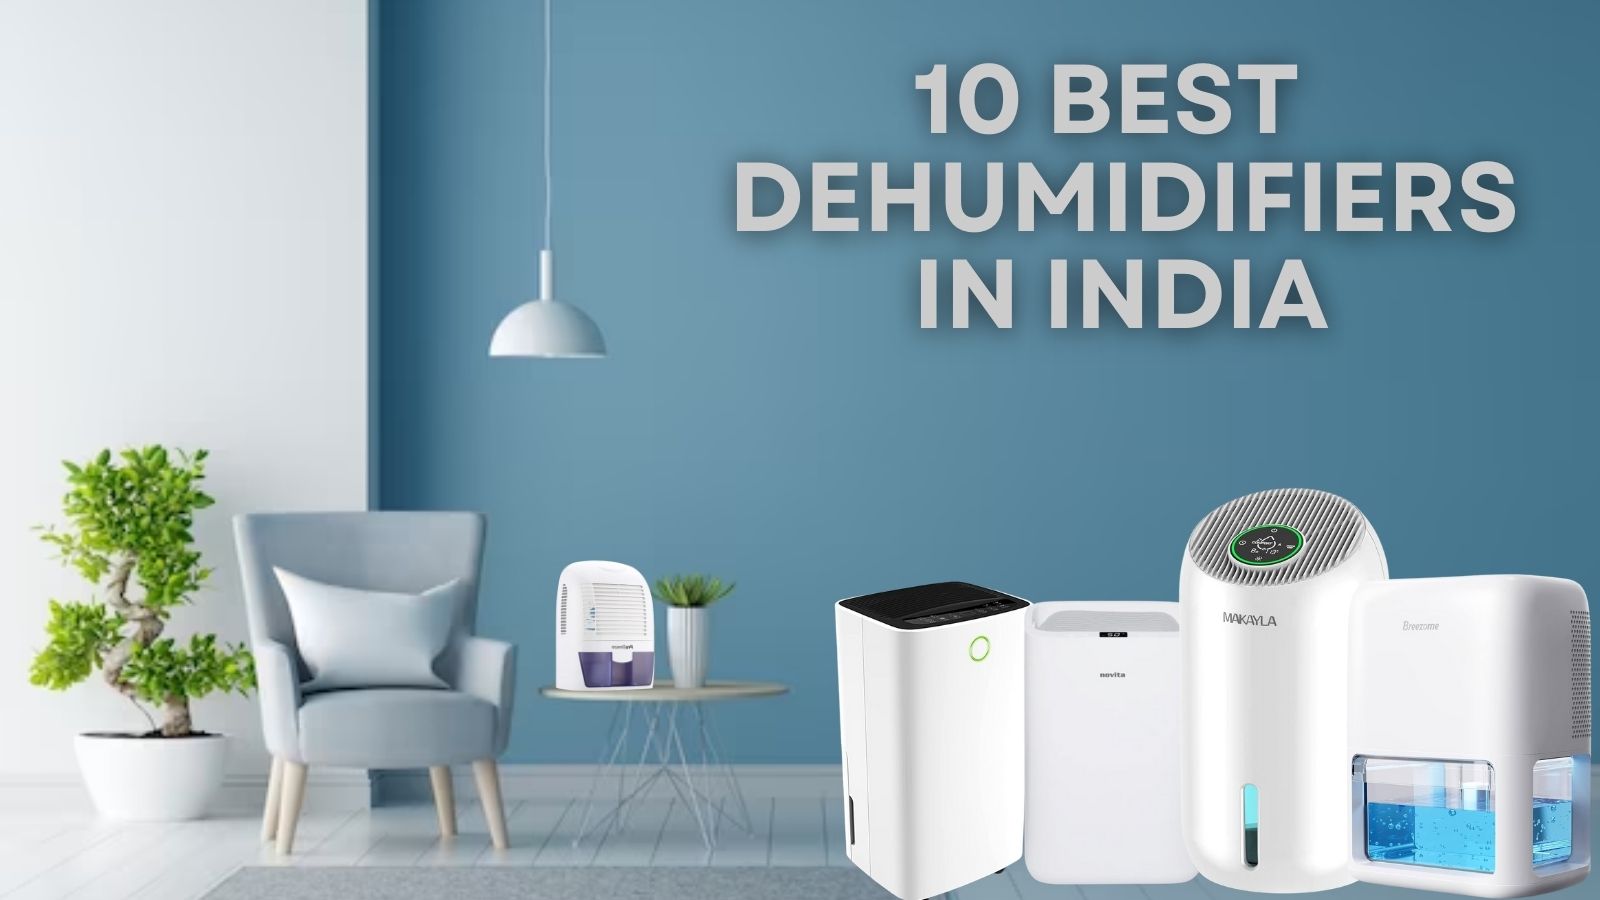 10 BEST DEHUMIDIFIERS IN INDIA